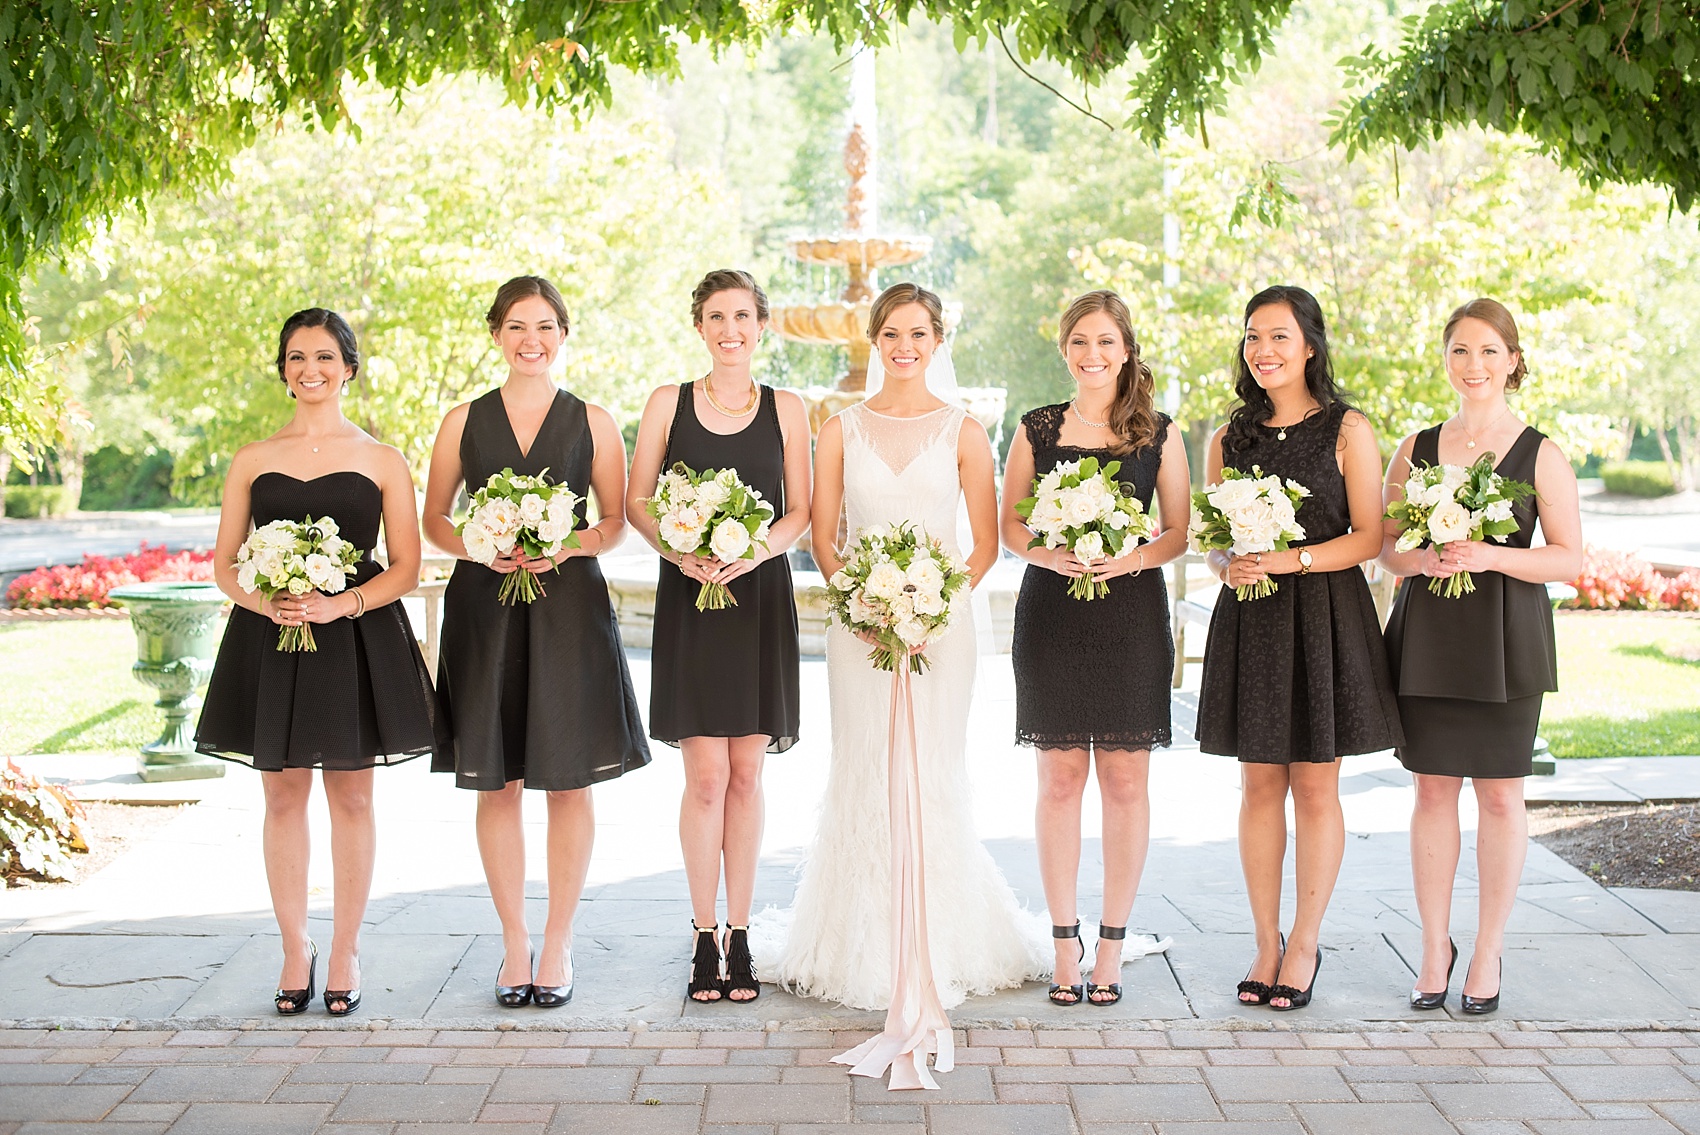 Pearl River Hilton bridal party wedding photos. Images by Mikkel Paige Photography, NYC wedding photographer.